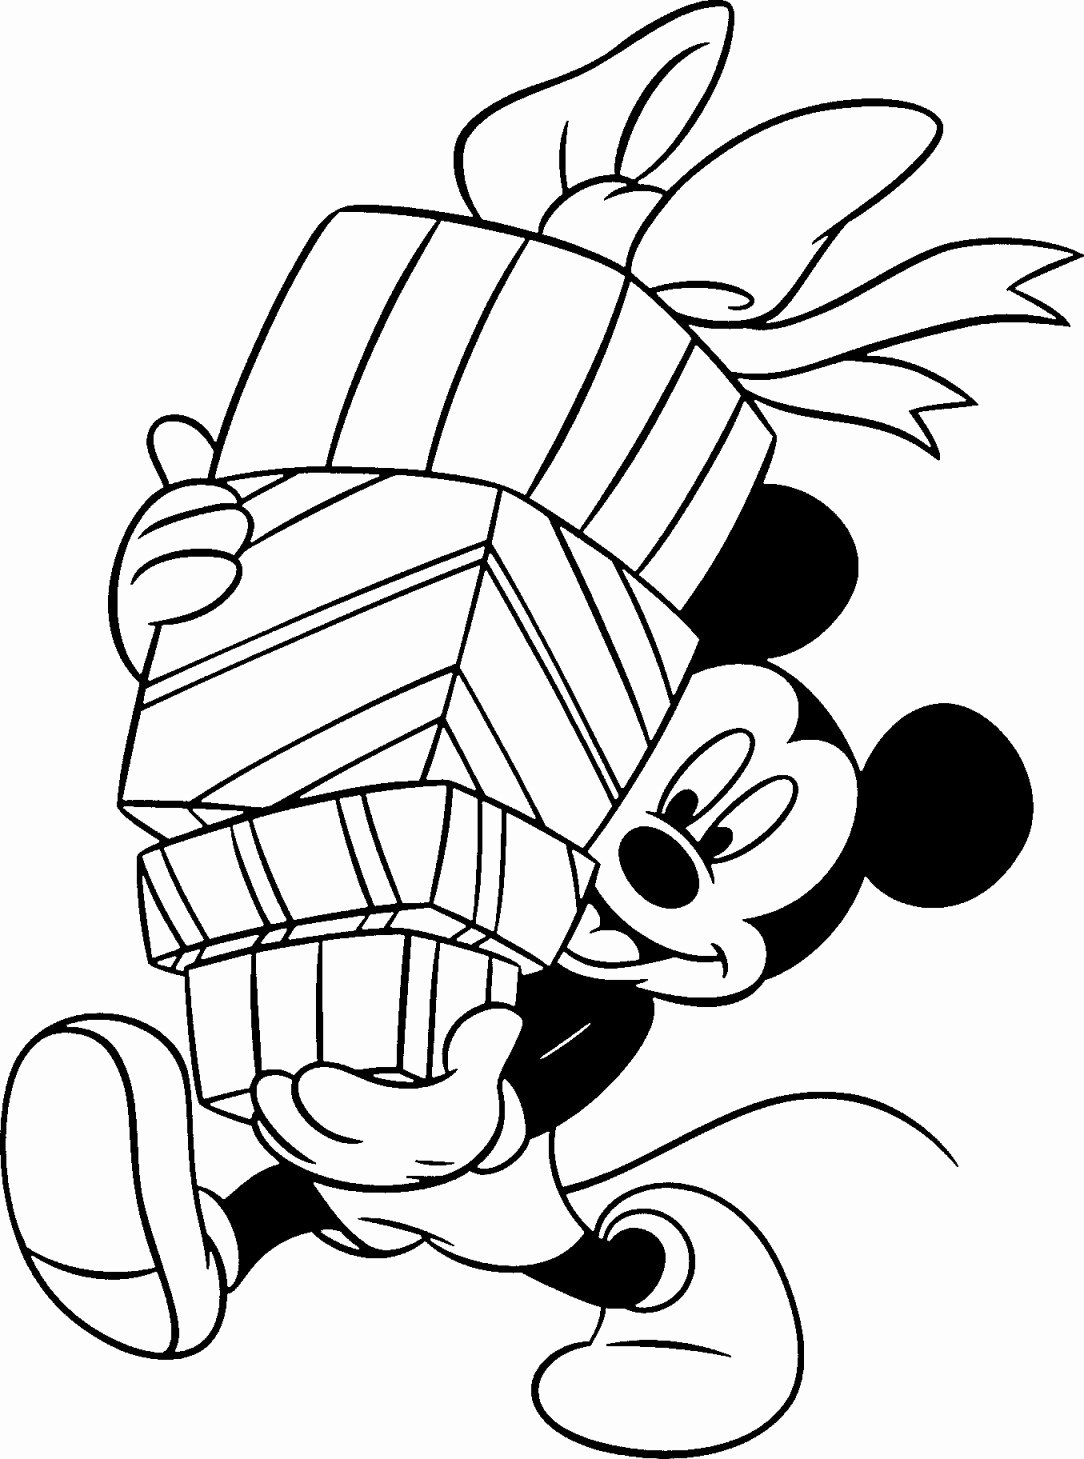 Mickey Mouse Colouring Sheets Luxury Free Disney Christmas Printable Coloring Pages for Kids